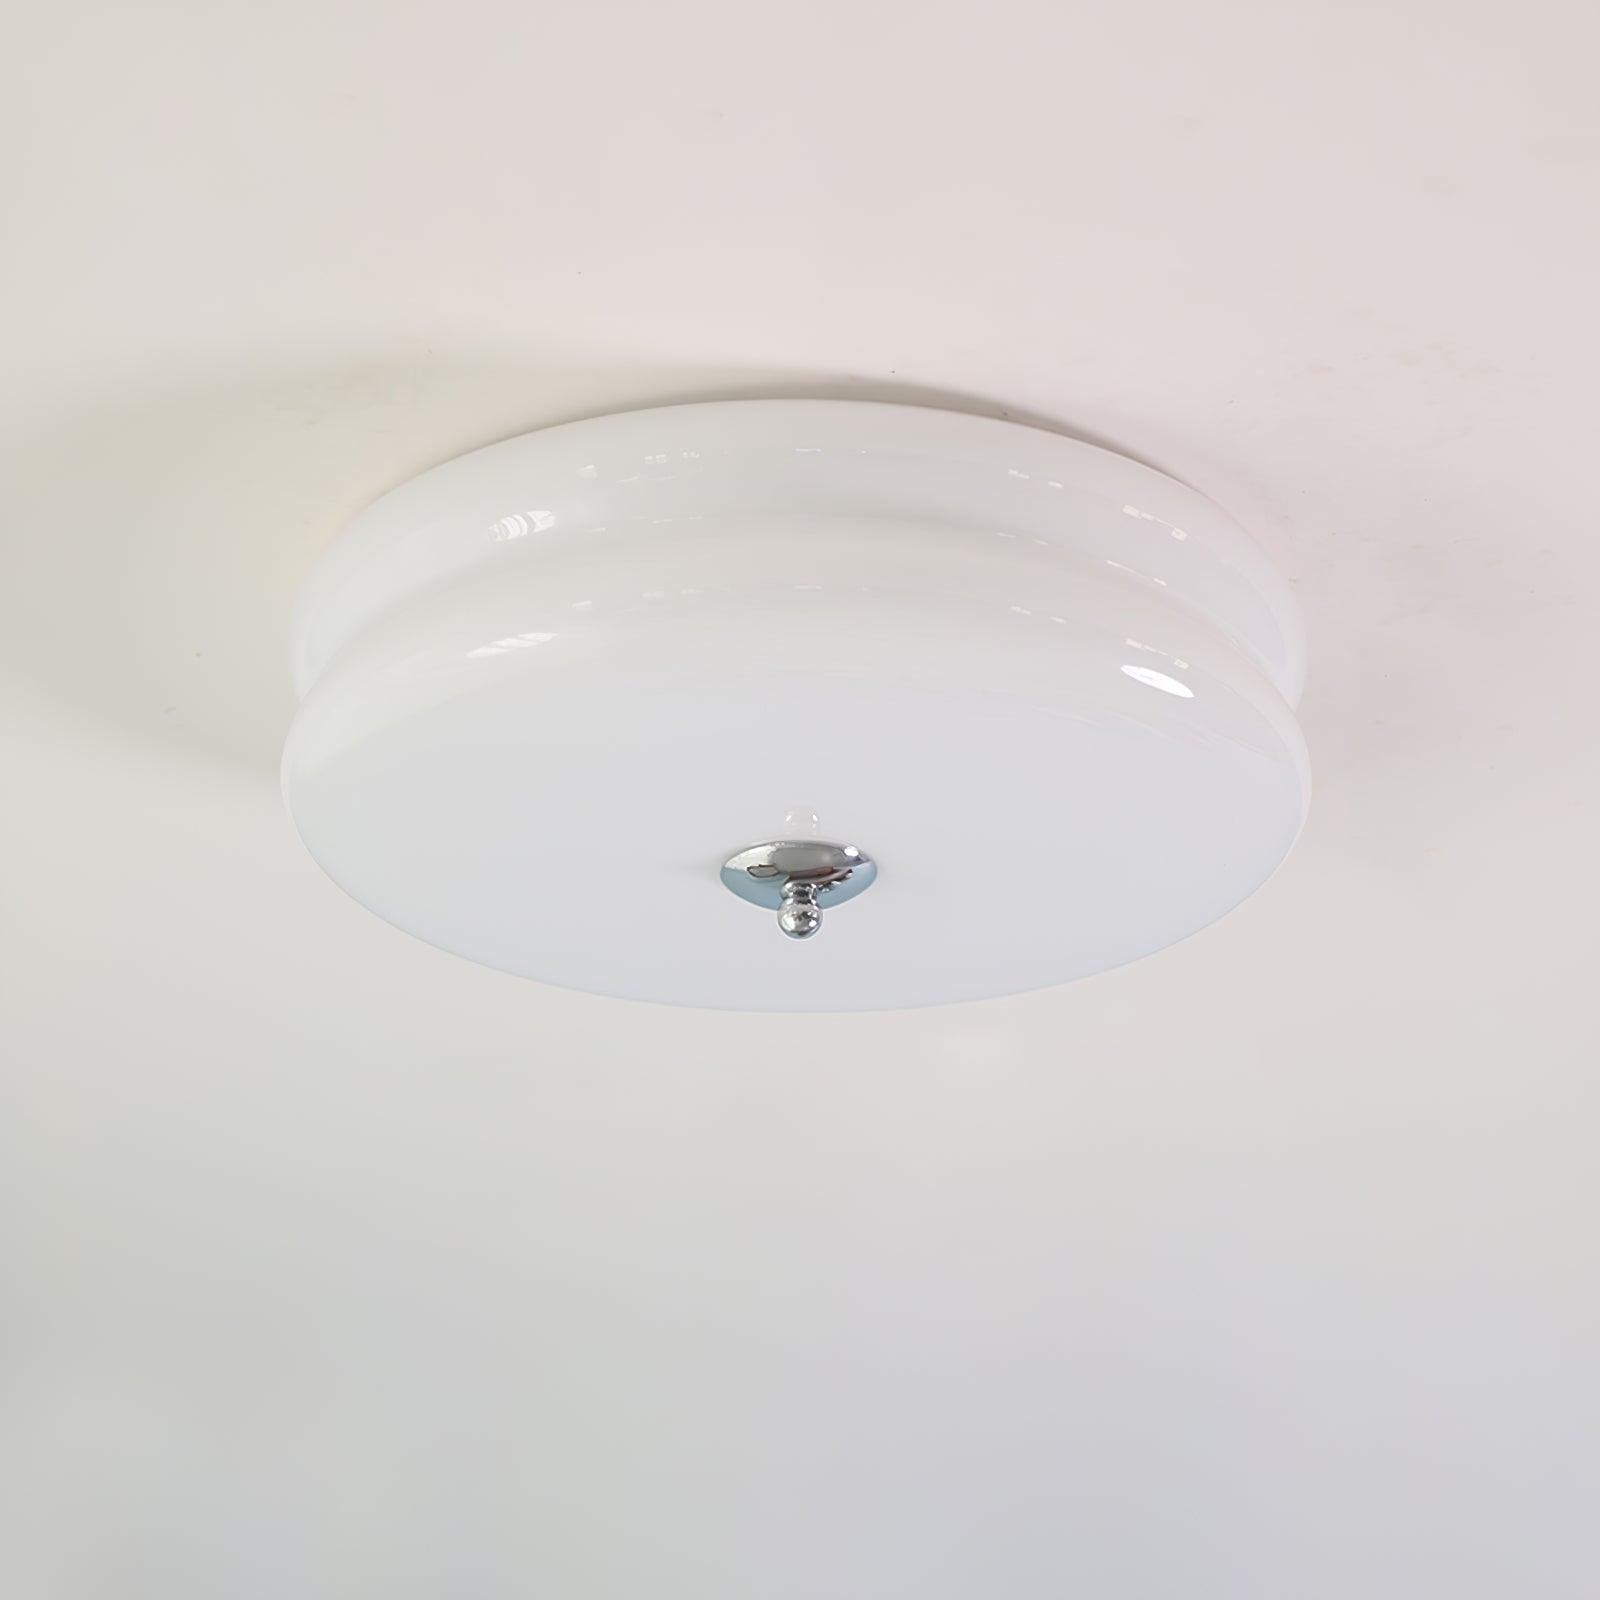 Art Deco Vintage Ceiling Light in Chrome and White with Cool Light, Diameter 12.6 inches and Height 5.1 inches (32cm x 13cm)